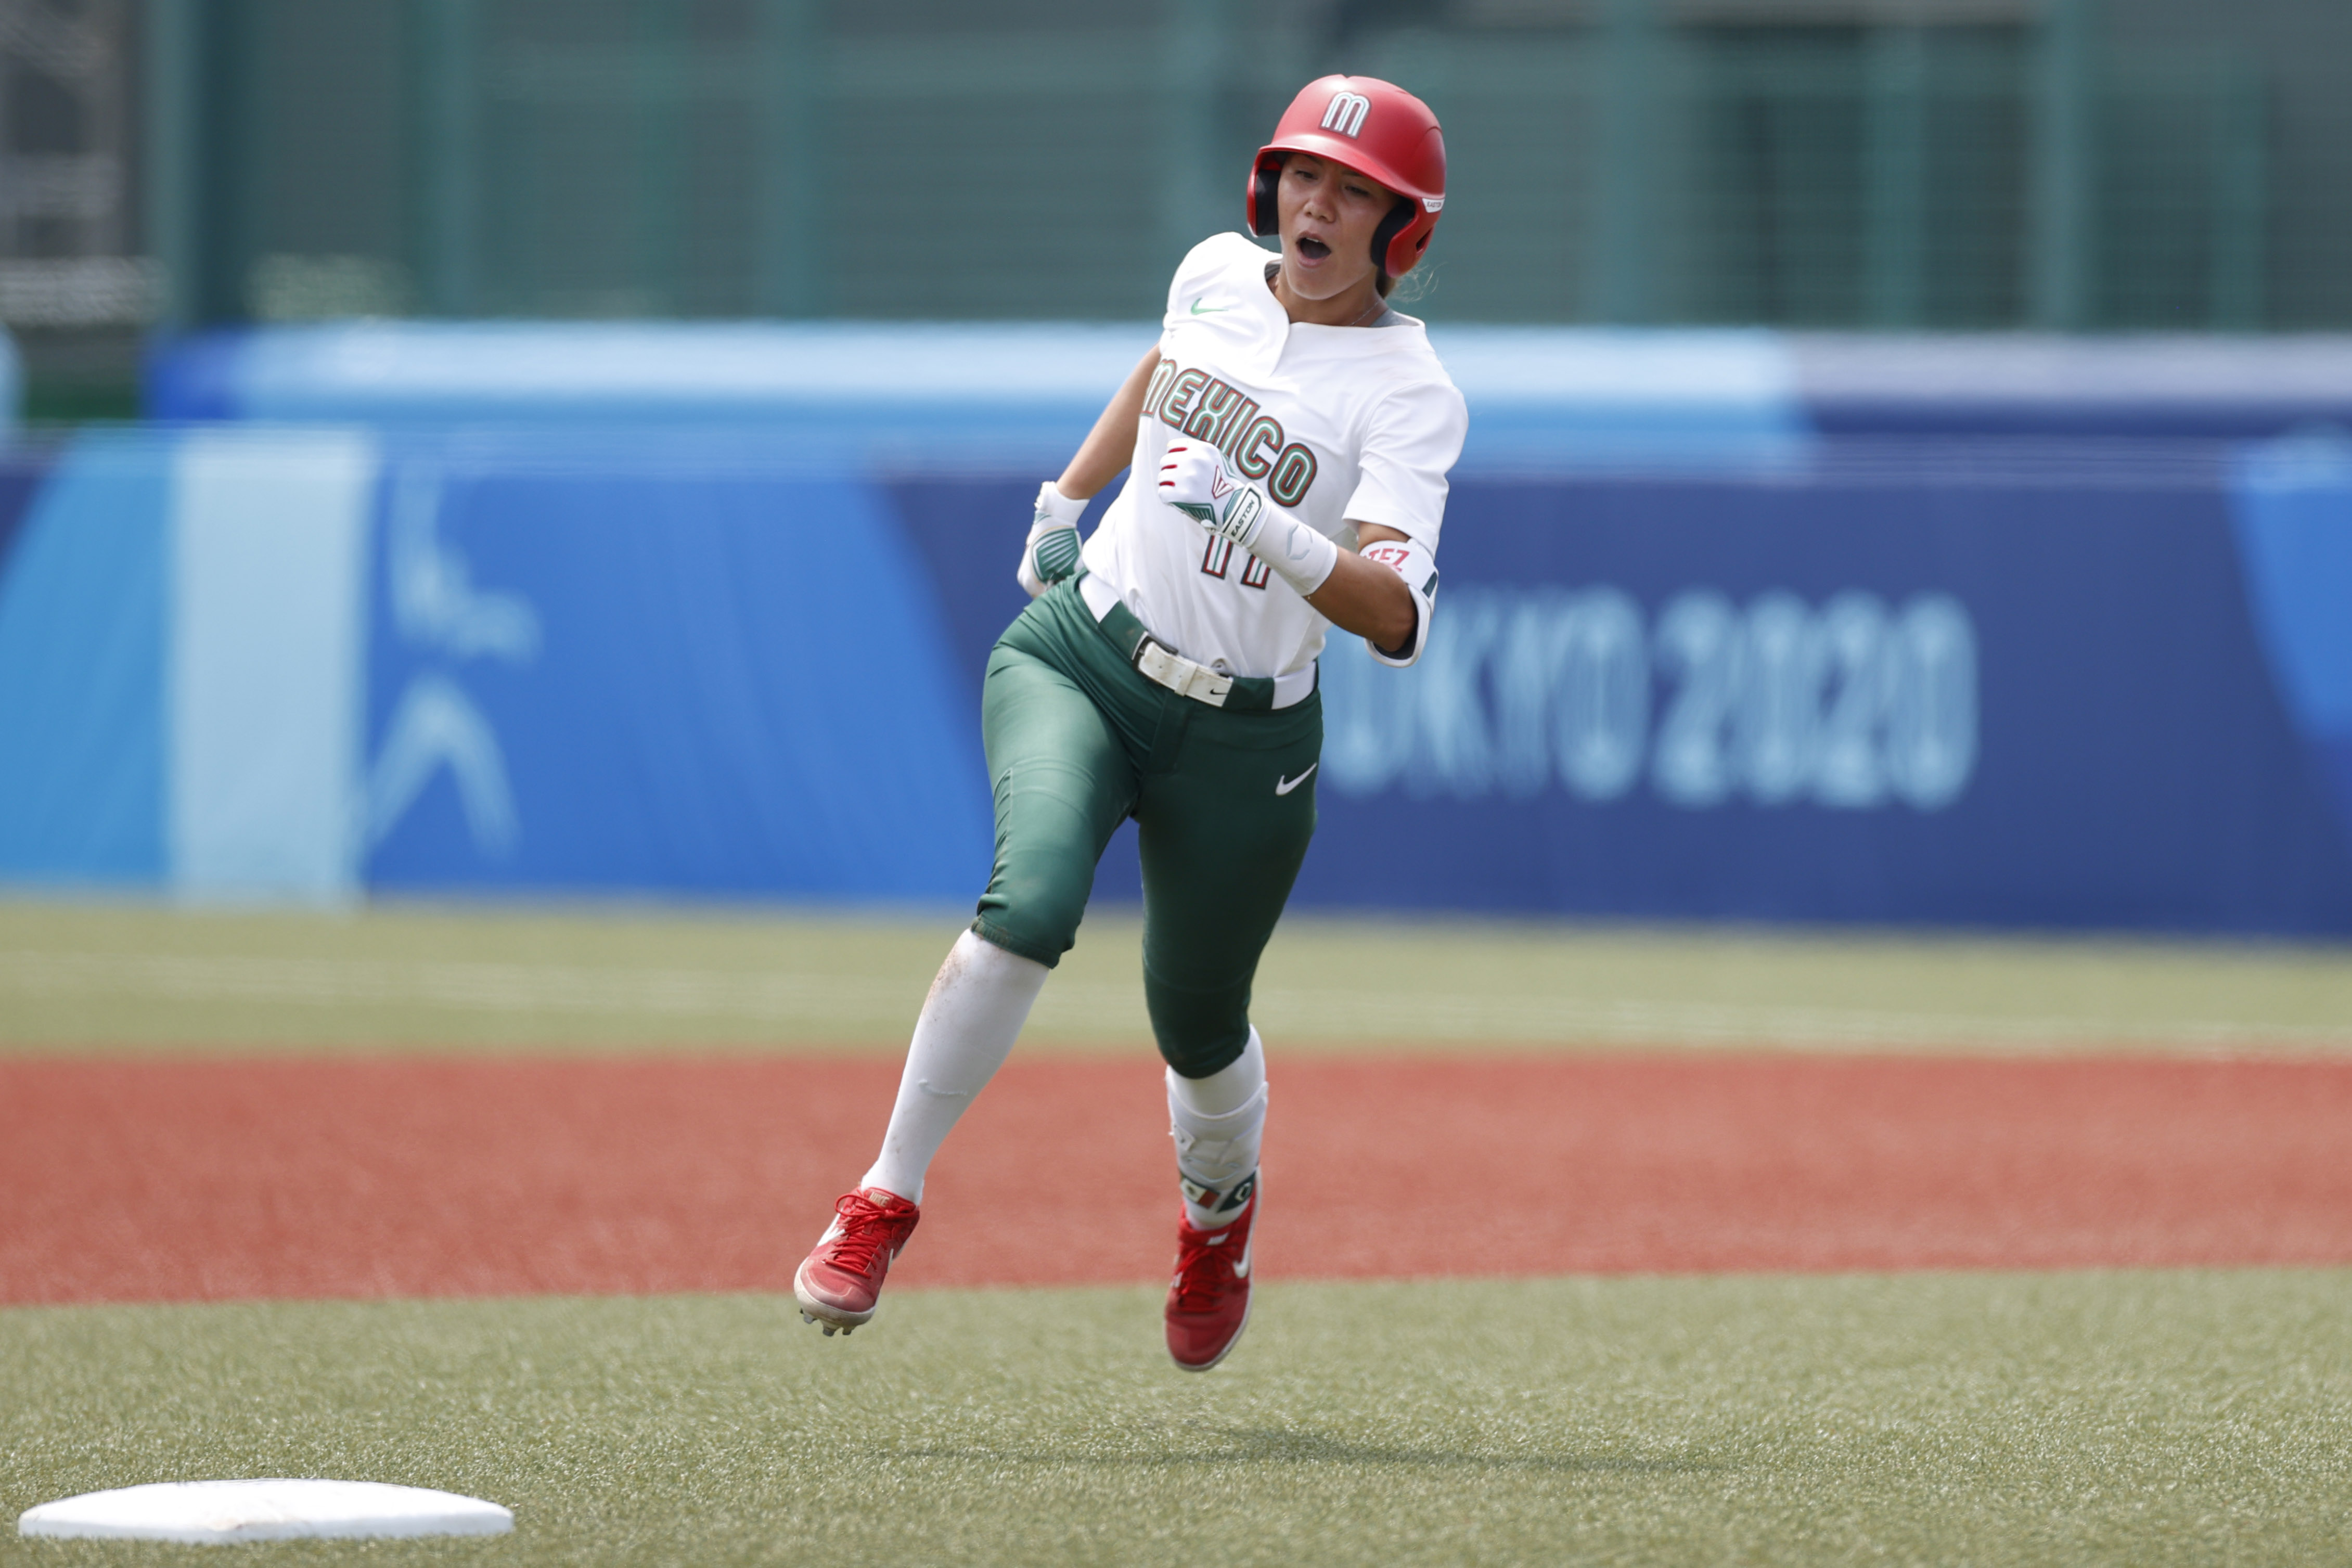 SoftballMexico to take on U.S. in clash of familiar foes and